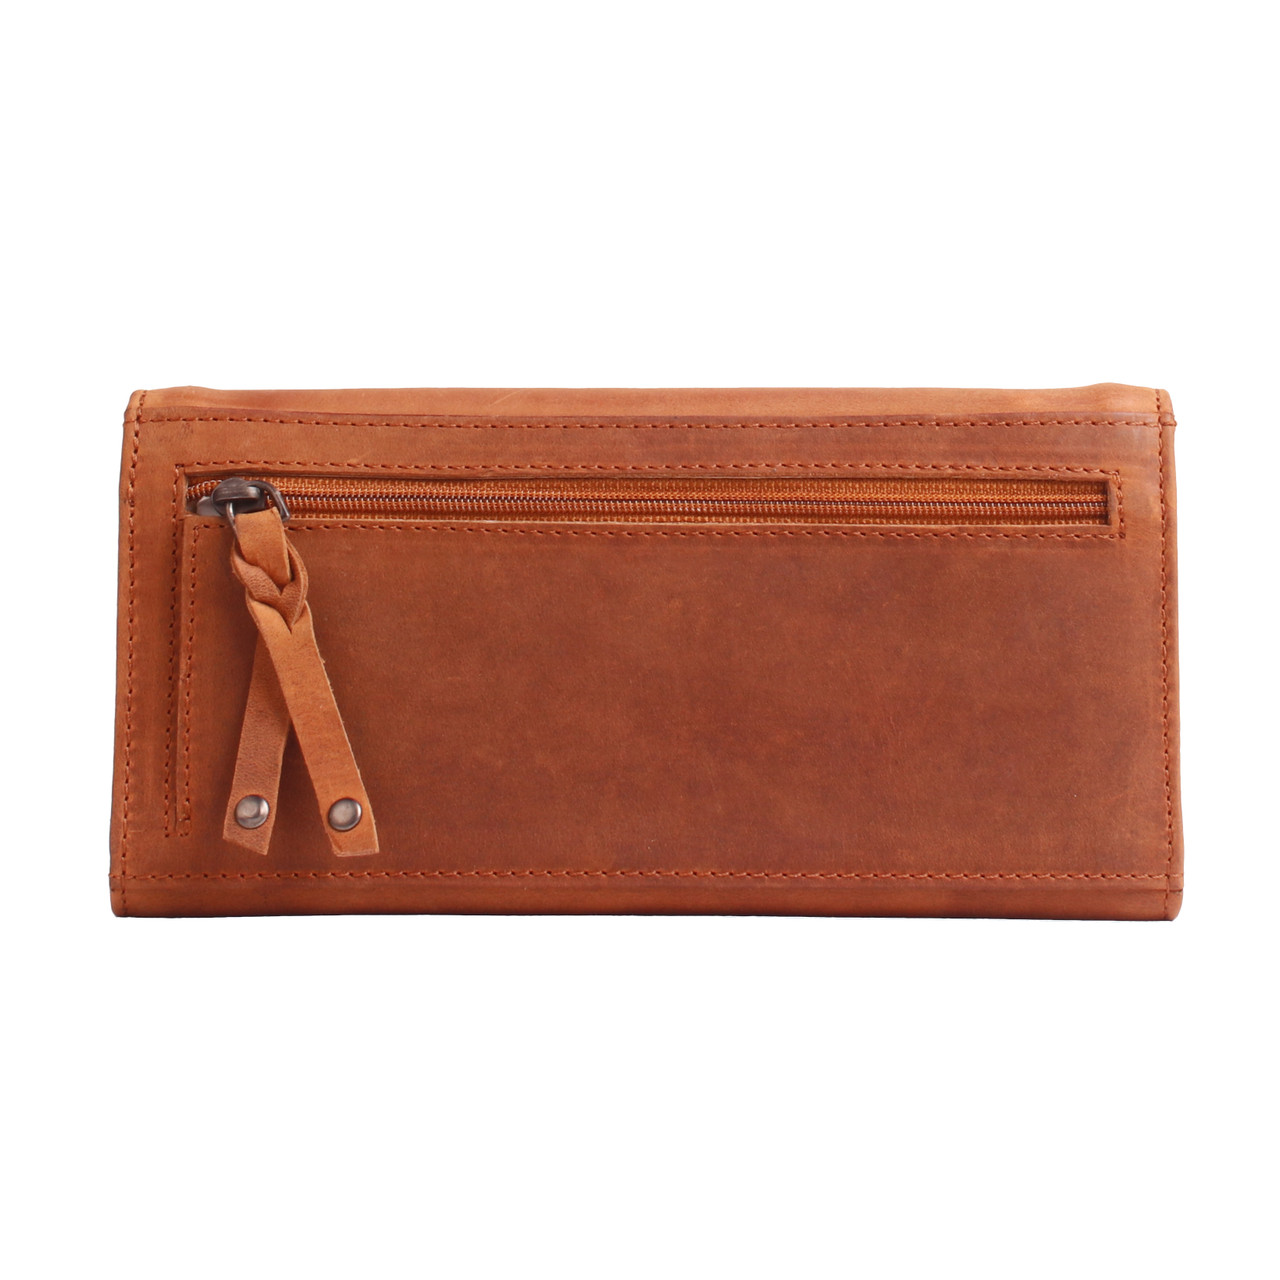 Hope Leather Wallet - Pistol Packn' Mama